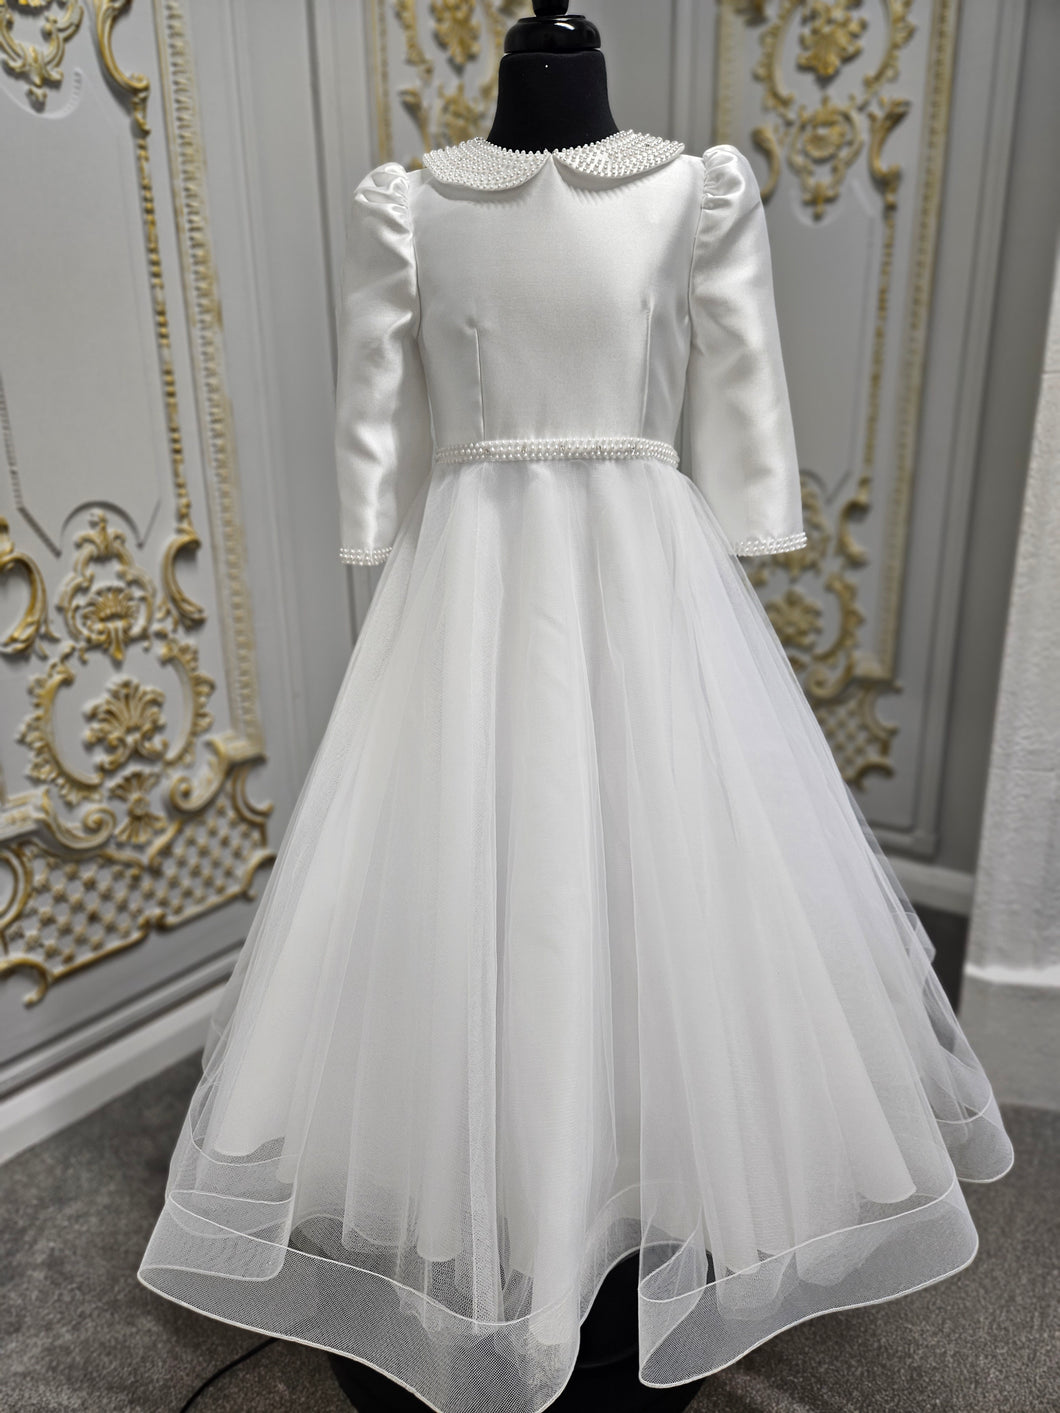 Isabella Girls White Communion Dress IS24616 EXCLUSIVE TO KINDLE